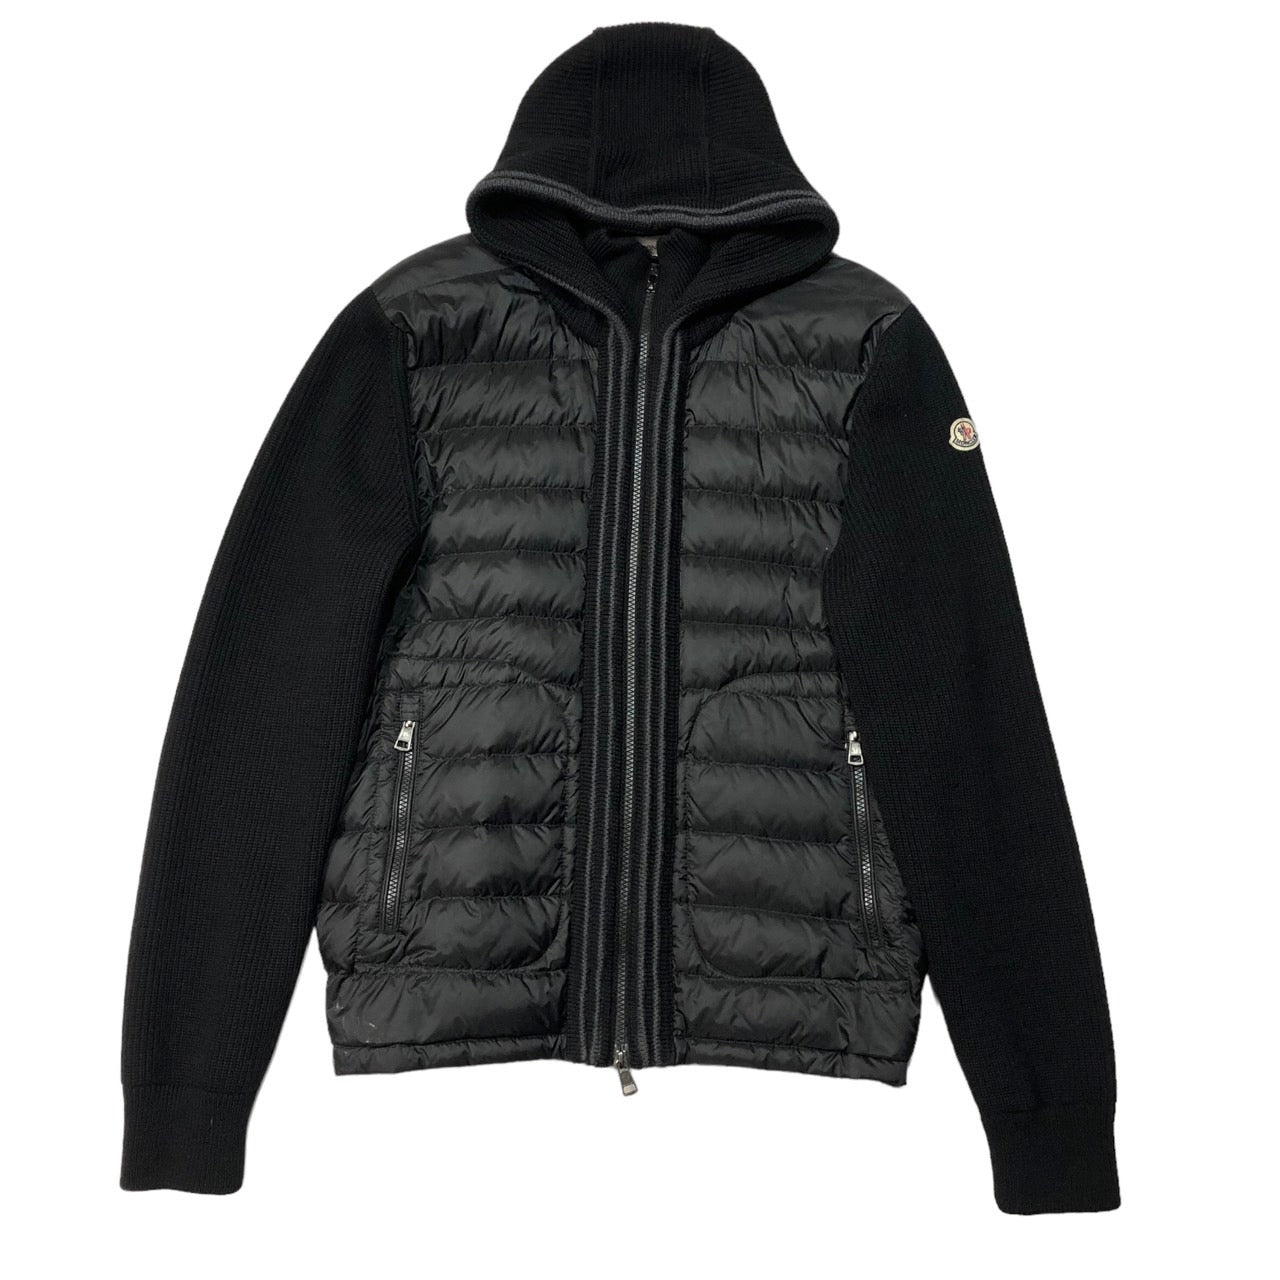 MONCLER(モンクレール) 16AW MAGLIONE TRICOT CARDIGAN/ニット 